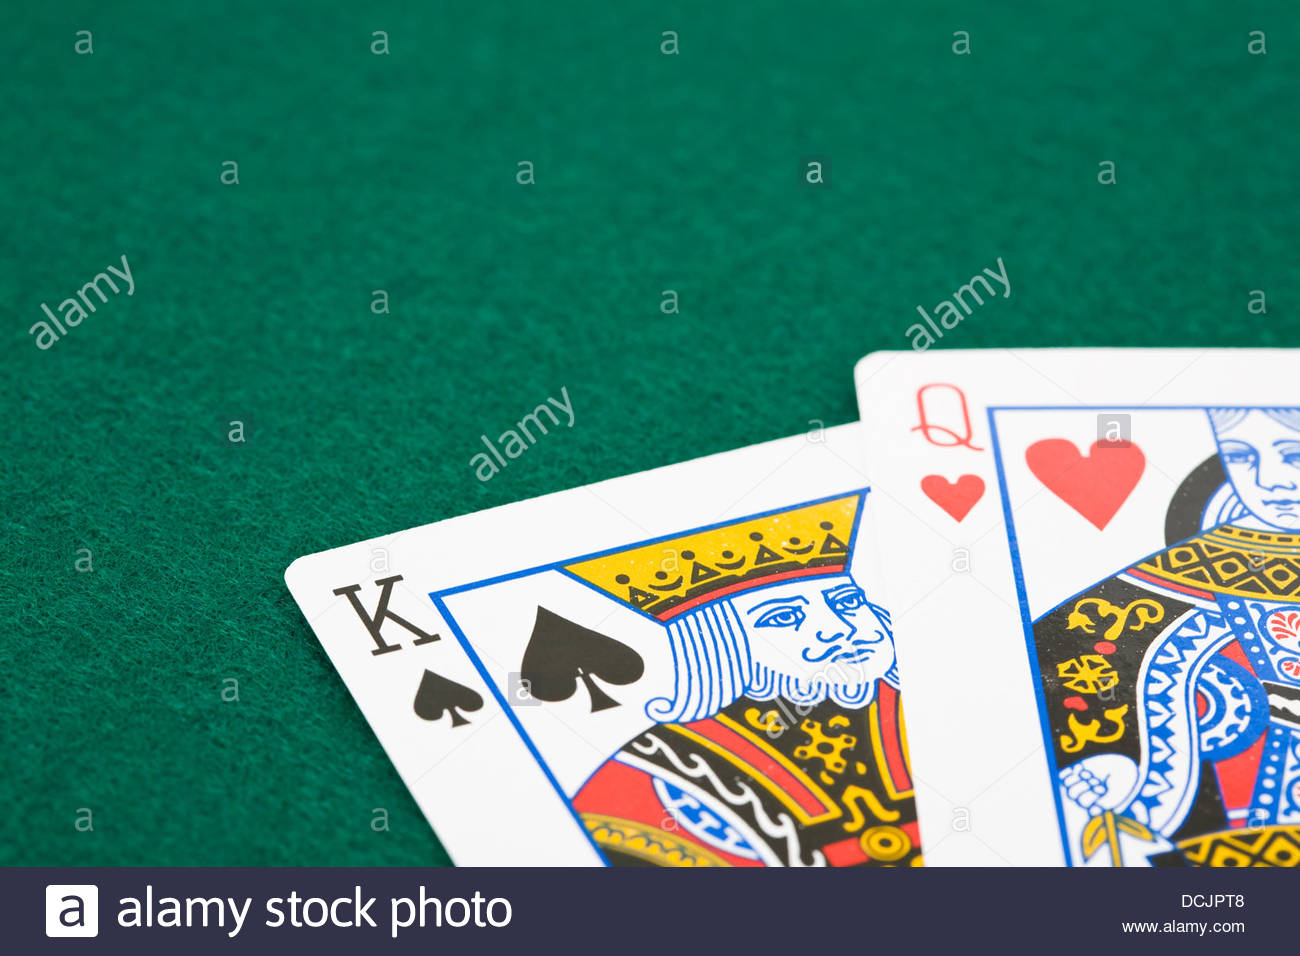 Closeup Of Queen Of Hearts And King Of Spades Playing Cards Over